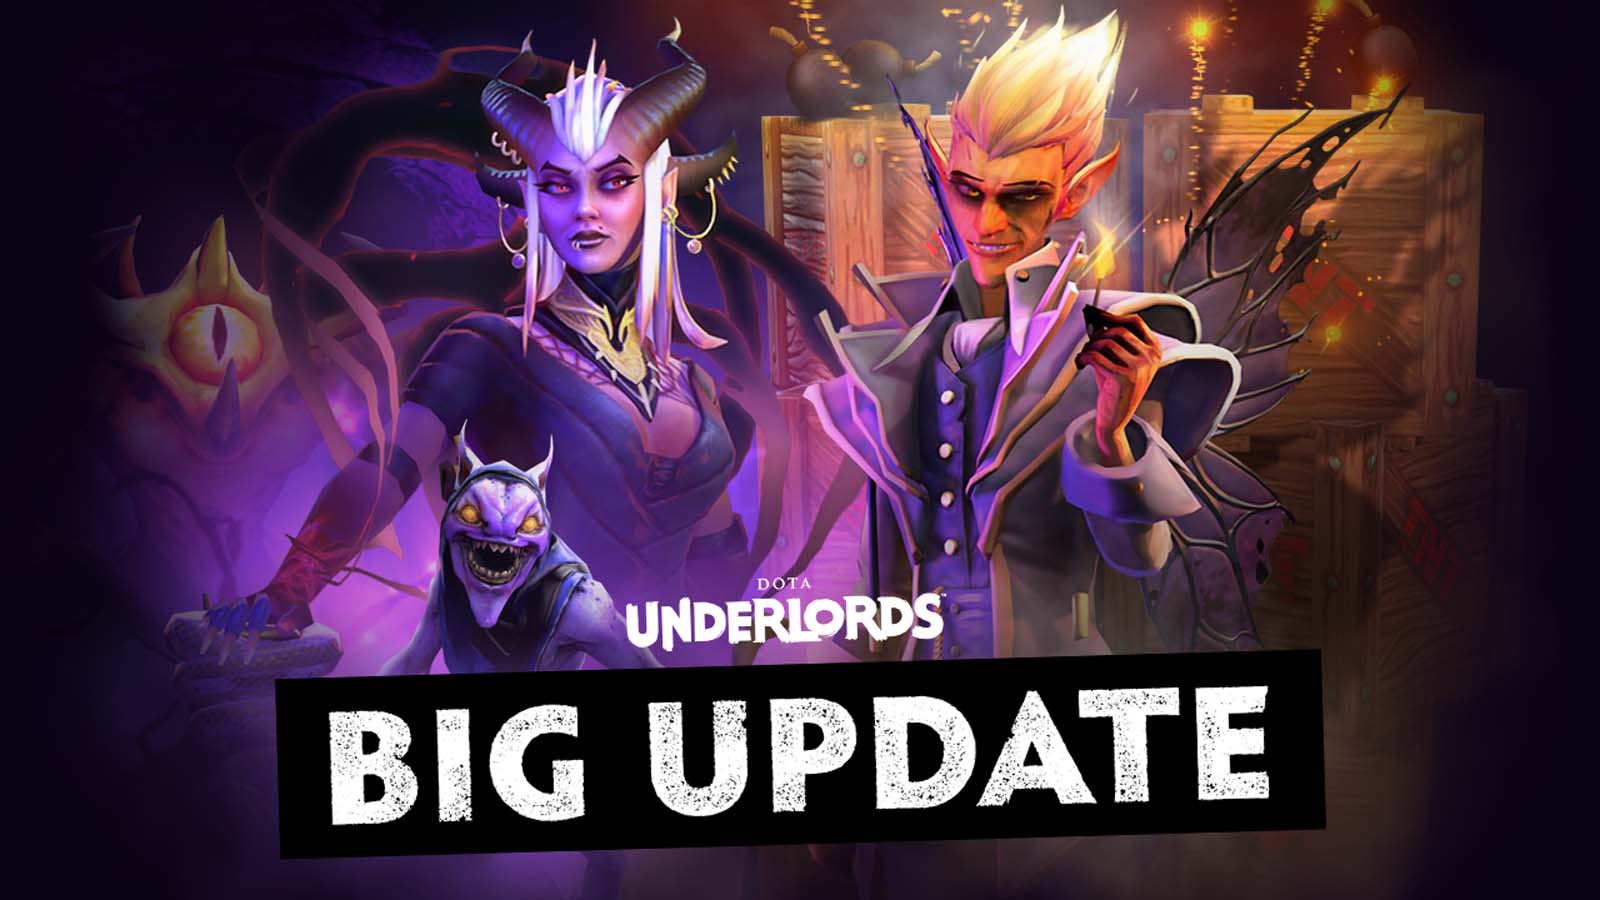 The Big Update That Finally Introduces The Underlords Is Now Live For